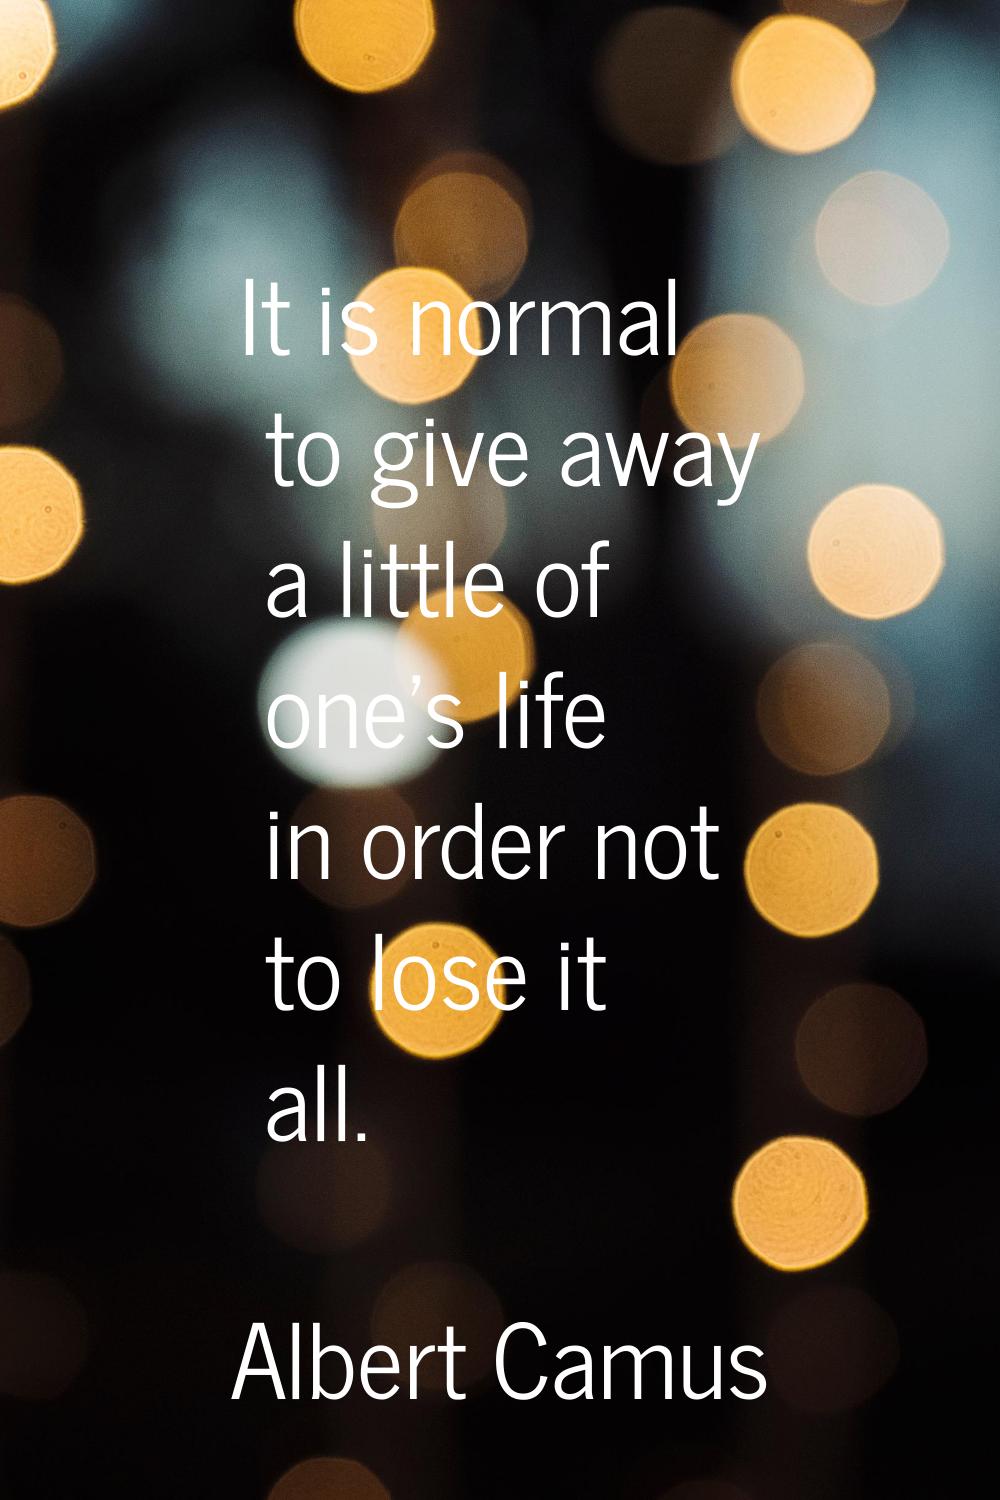 It is normal to give away a little of one's life in order not to lose it all.